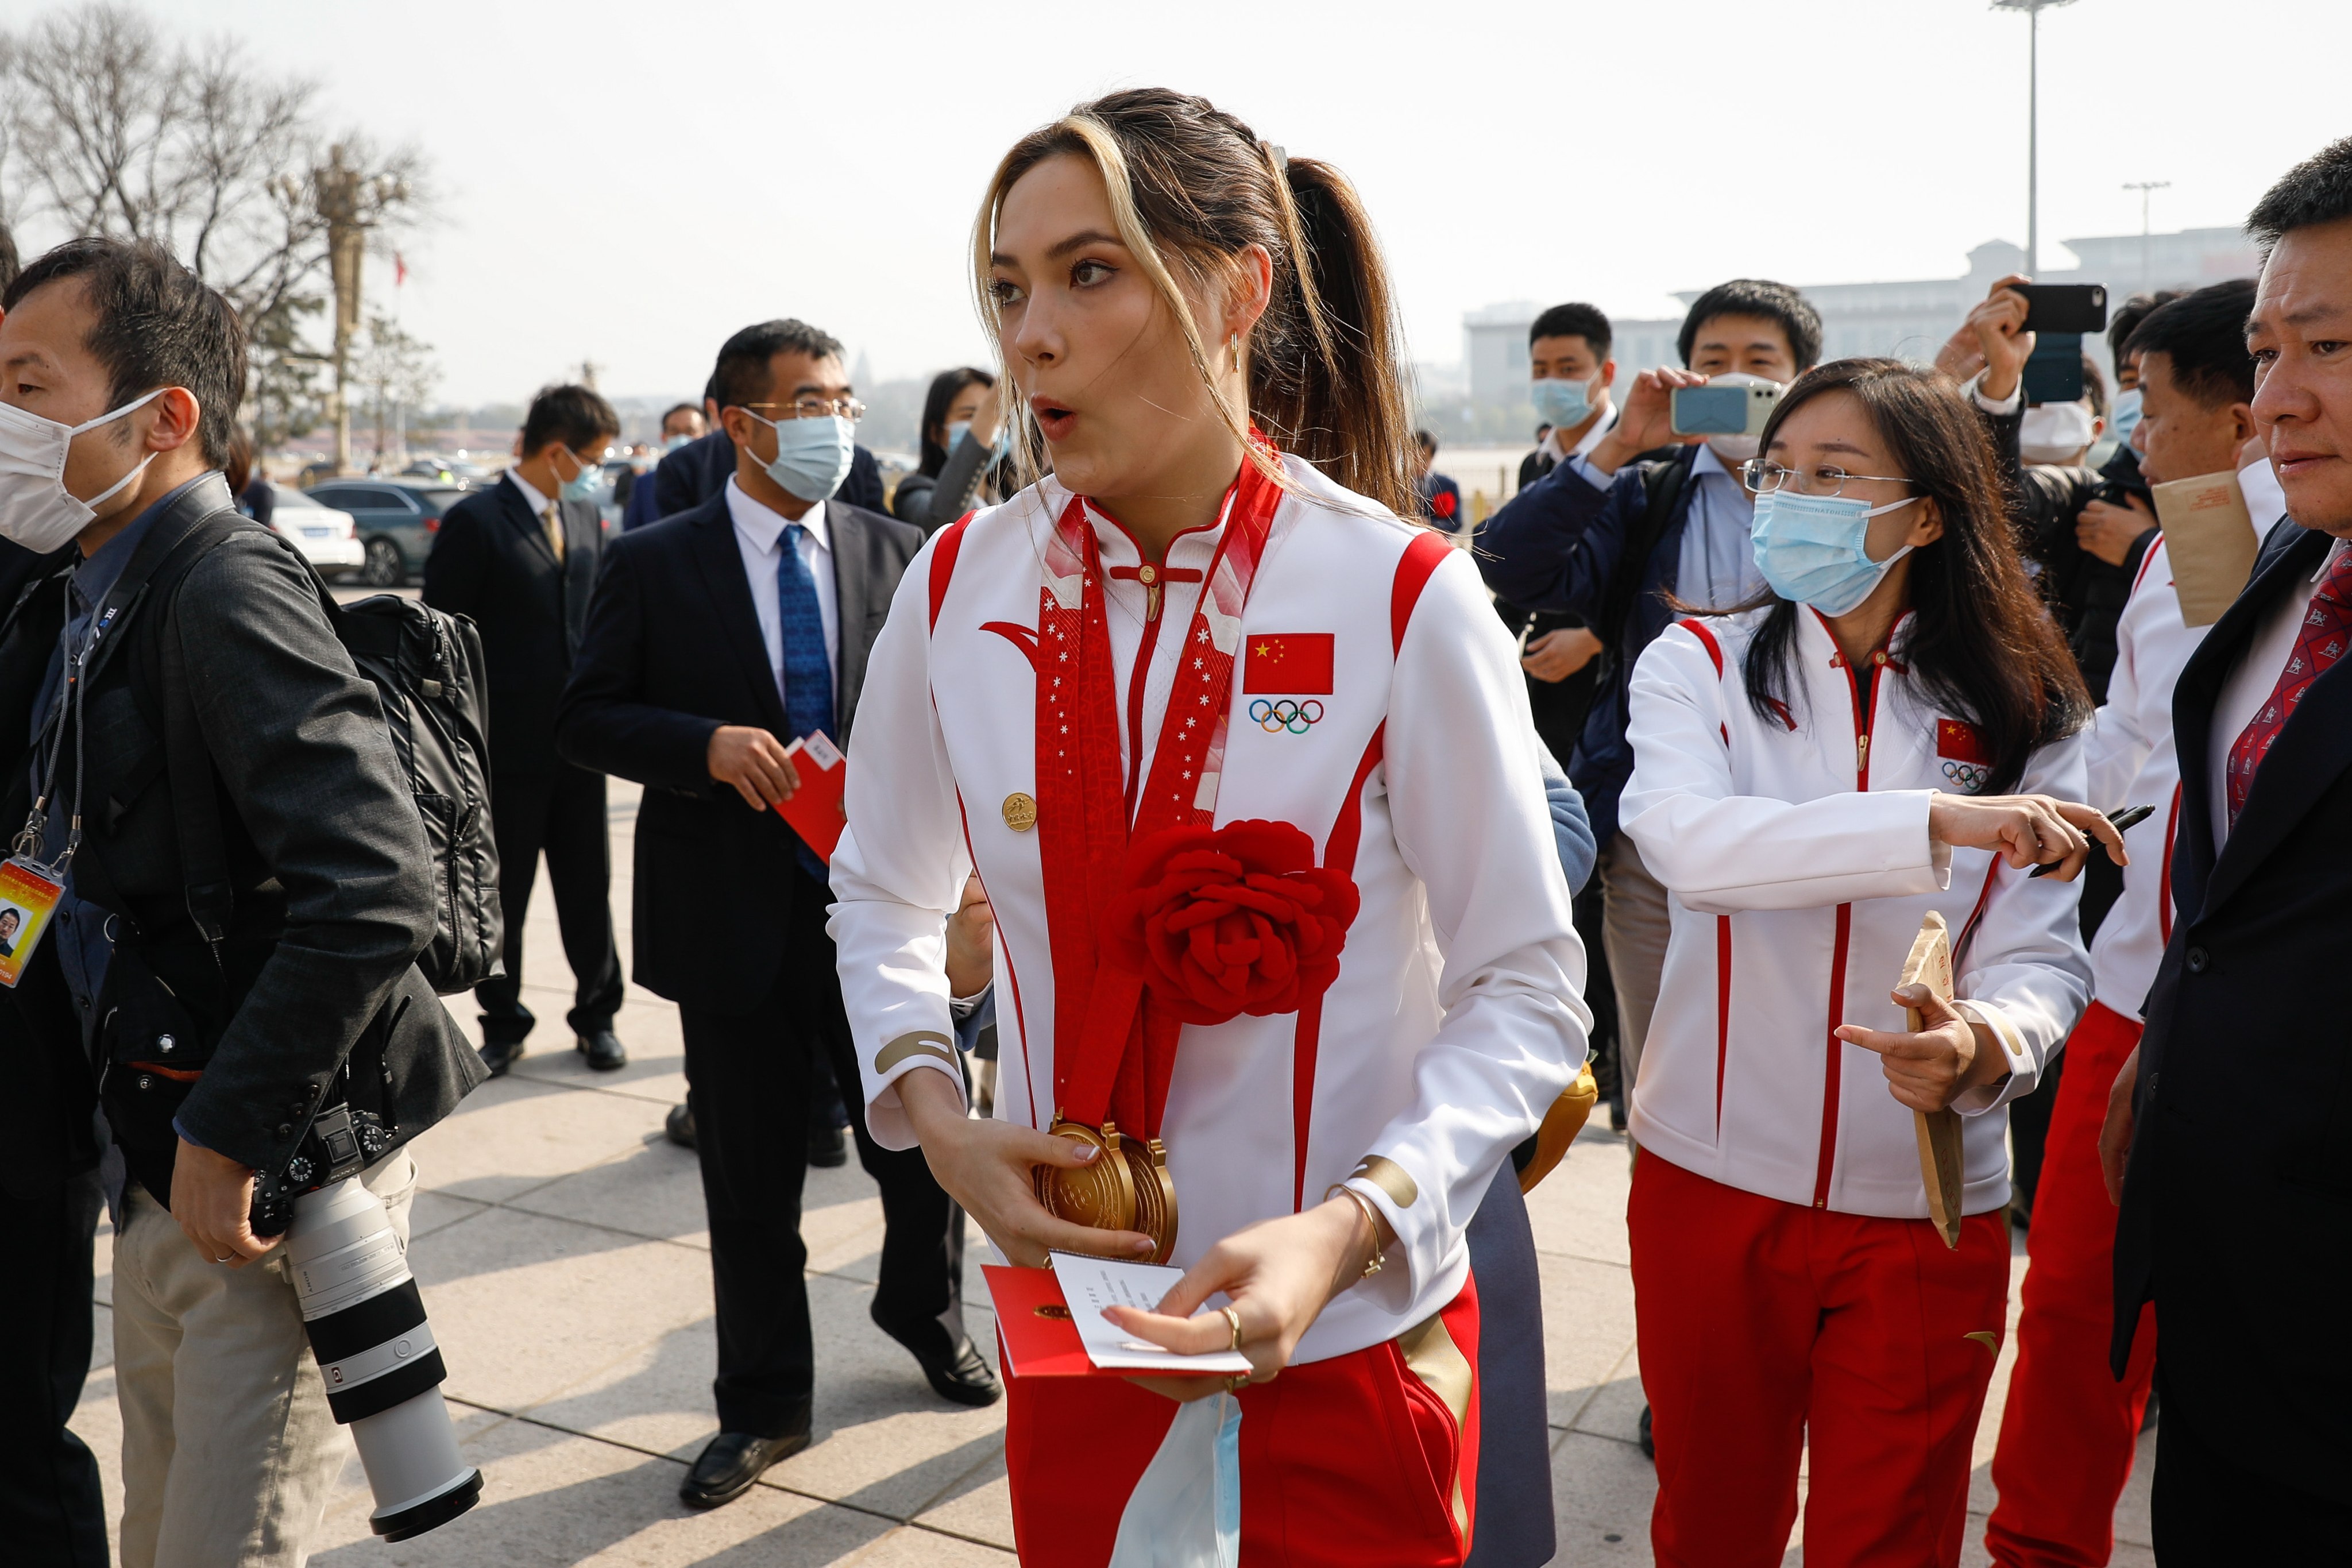 Chinese Olympian Eileen Gu reacts after being mobbed by fans and journalists during her arrival at the awards ceremony for the Beijing 2022 Winter Olympic and Paralympic Games at the Great Hall of the People on April 8, 2022. Photo: EPA-EFE/Mark R. Cristino